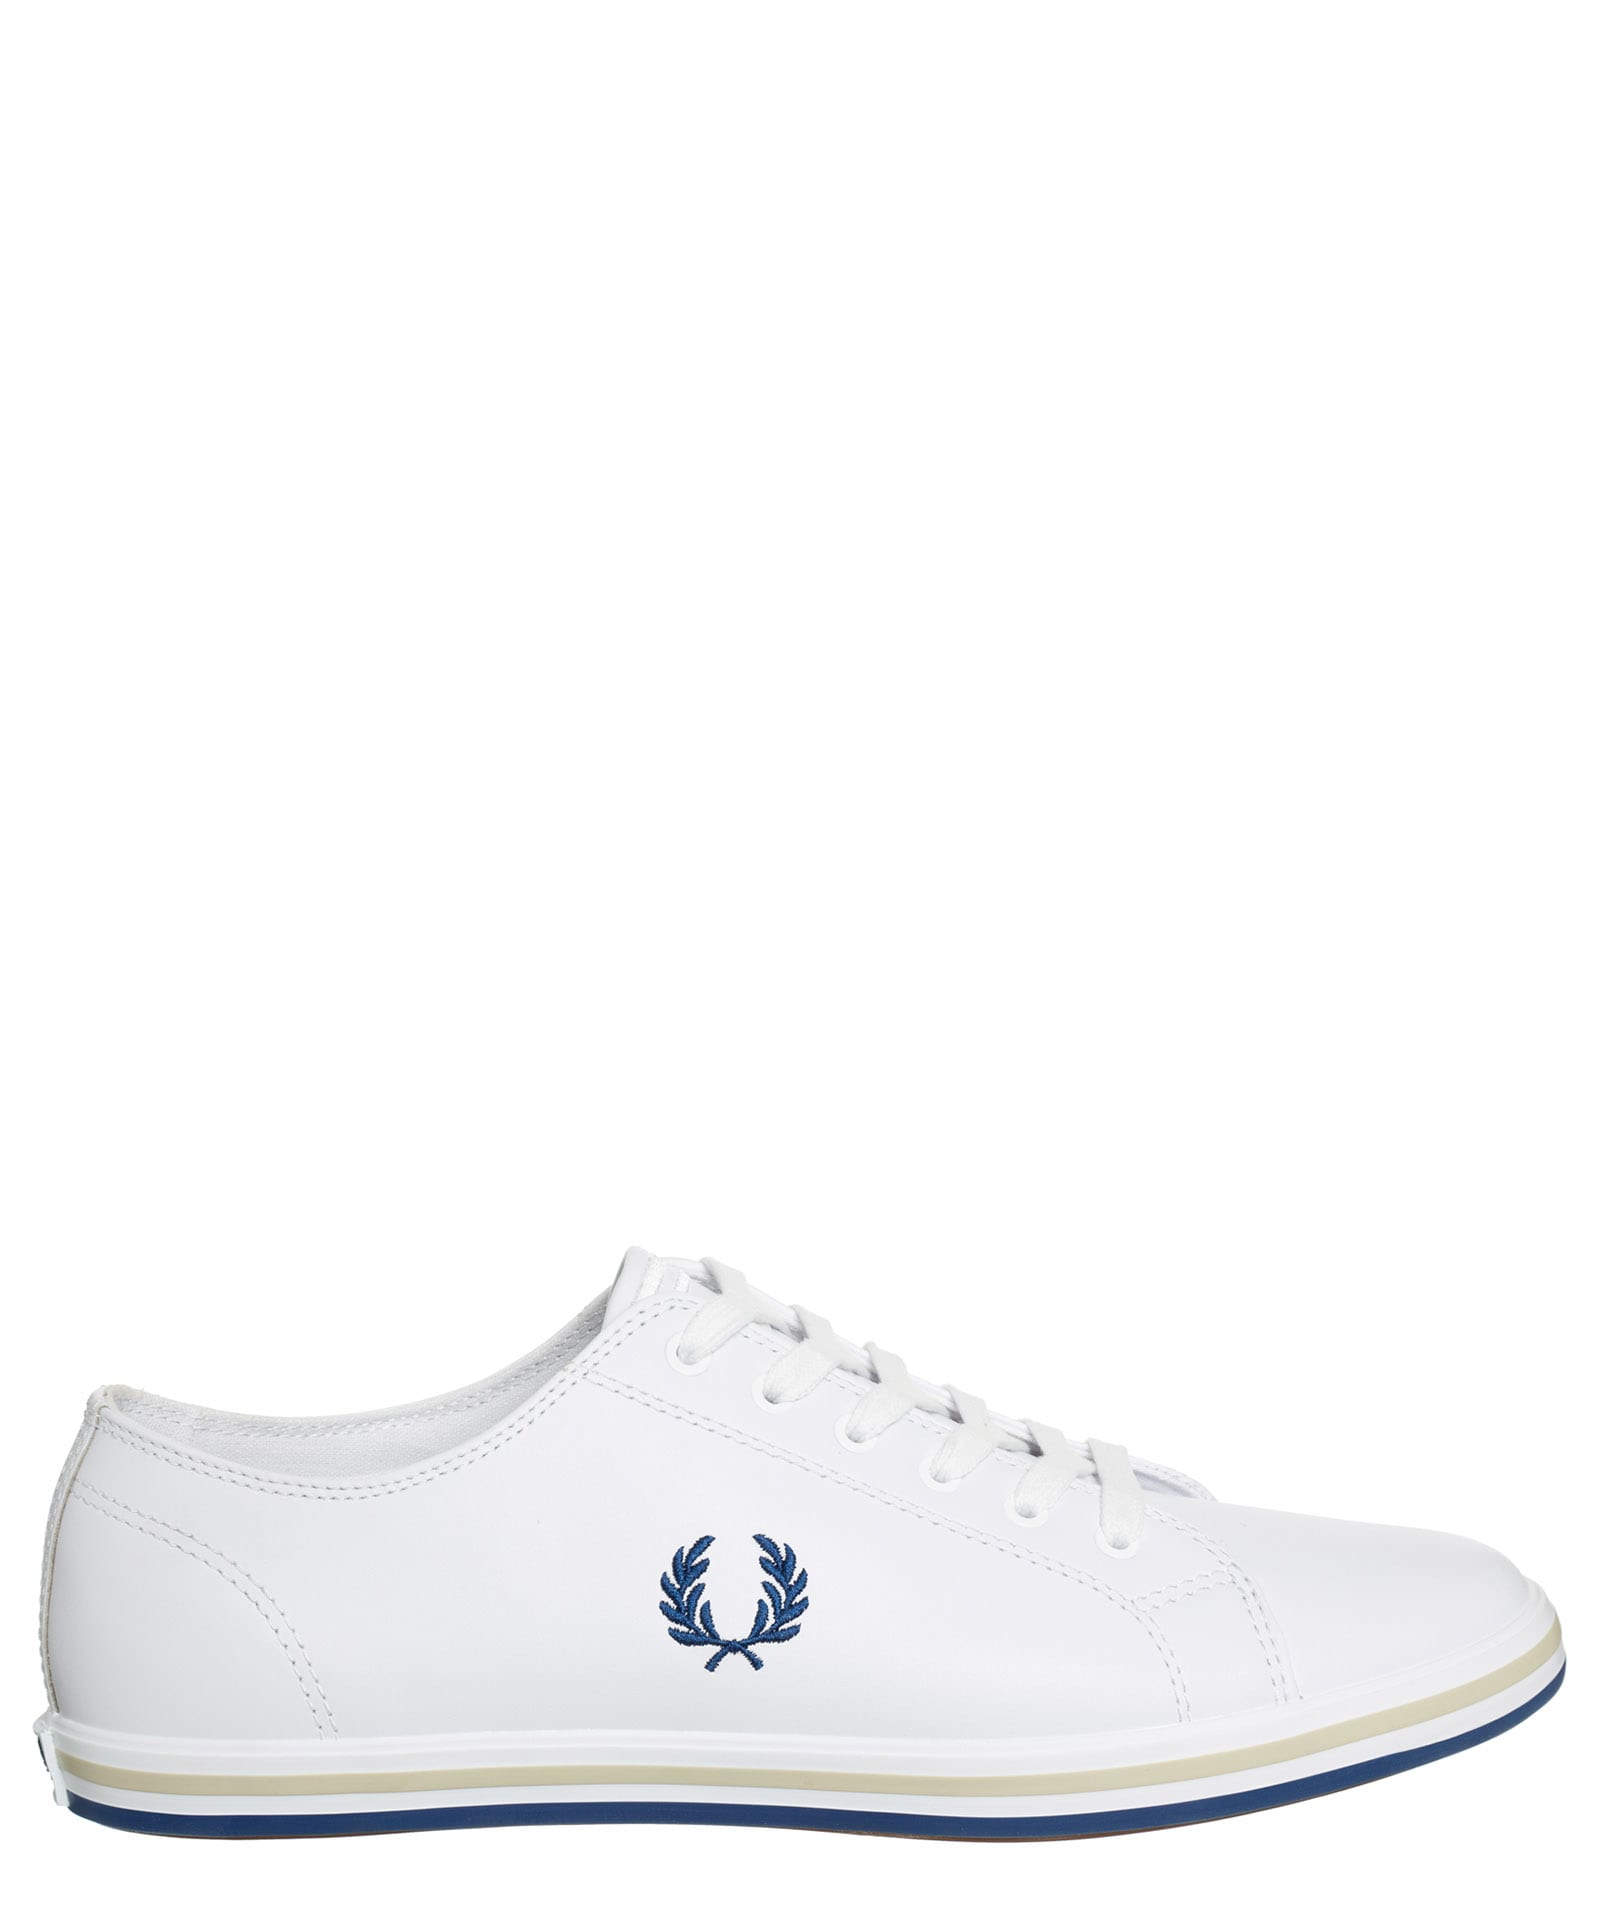 FRED PERRY KINGSTON LEATHER SNEAKERS